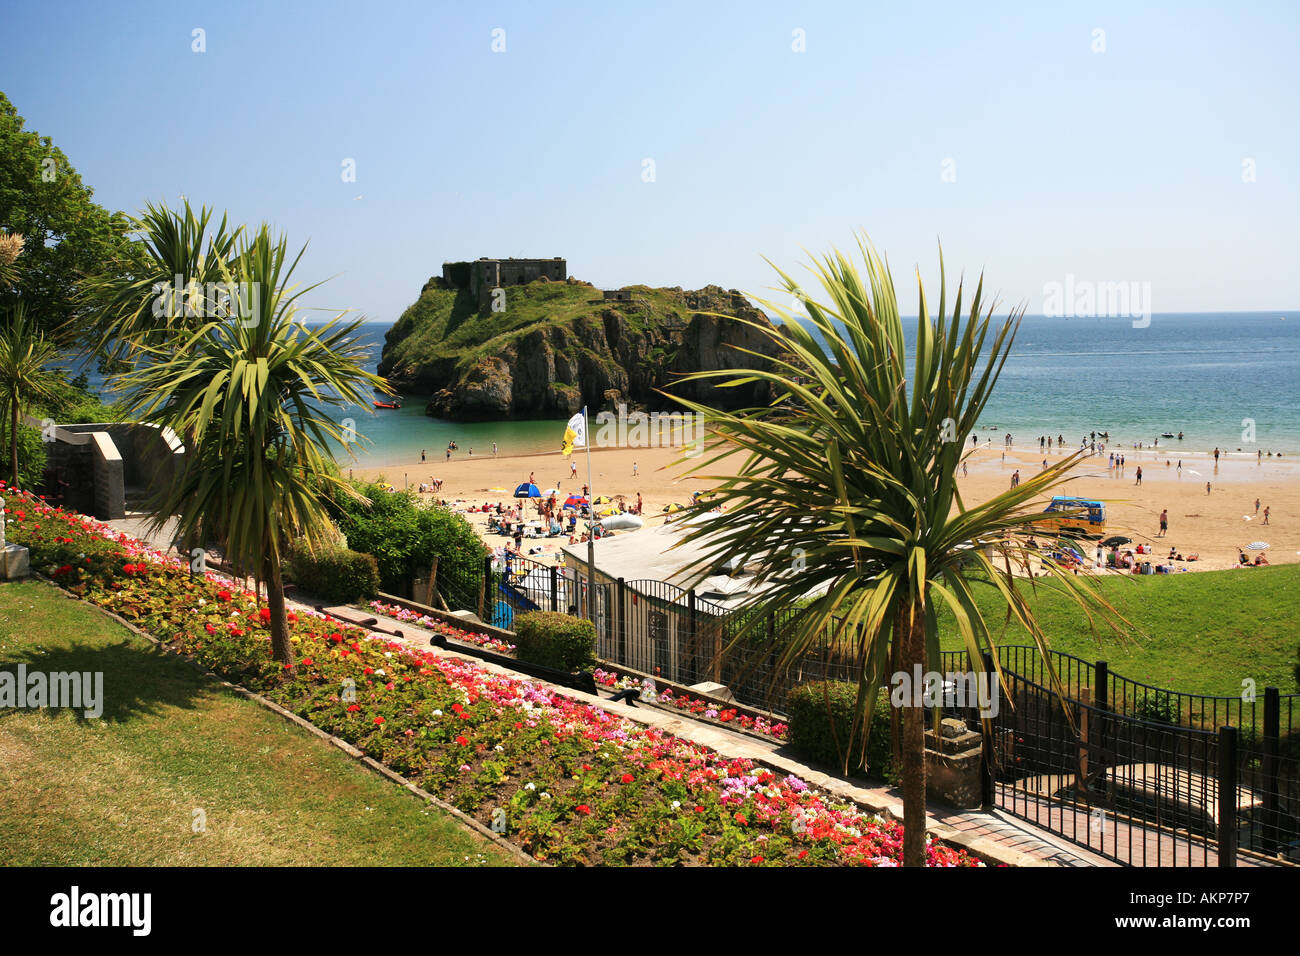 Tenby's famous South beach packed with sunbathing tourists and St Catherine's island fort Pembrokeshire West Wales Britain UK GB Stock Photo